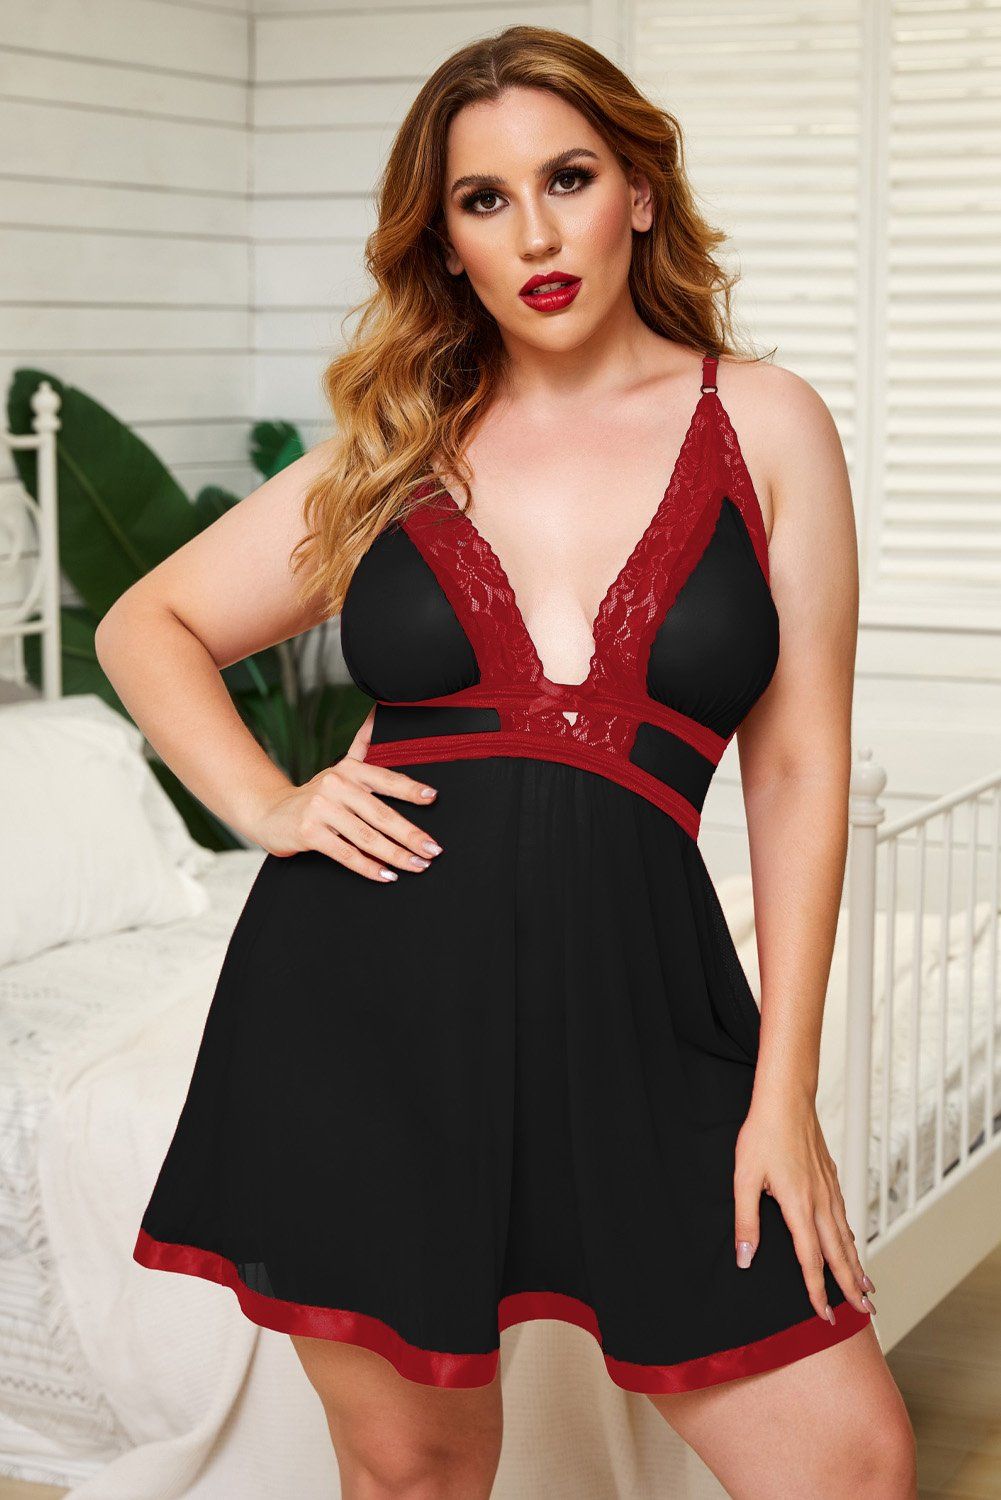 – Transparent mesh crafted which looks sexy hot.
– Adjustable straps, lace trim.
– Deep v neckline with bowknot d√©cor front center.
– High waist and flowy mesh skirt.
– Azura Exchange plus size lingerie with matching panty.
. .
Size Chart (CM).
Sizes.	Waist.	Under_Bust_Girth.	Trousers_Waist.
	Relax.	Relax.	Relax.
1X.	76.	76.	80.
2X.	83.	83.	87.
3X.	90.	90.	94.
4X.	97.	97.	101.
5X.	104.	104.	108.
Elasticity.	Medium.
. . Note:.
1.There maybe 1. -2 cm. deviation in different sizes, locations and stretch of fabrics. Size chart is for reference only, there may be a little difference with what you get..
2.There are 3 kinds of elasticity: High Elasticity (two-sided stretched), Medium Elasticity (one-sided stretched) and Nonelastic (can not stretched )..
3.Color may be lighter or darker due to the different PC display..
4.Wash it by hand in 30-degree water, hang to dry in shade, prohibit bleaching..
5.There maybe a slightly difference on detail and pattern of this dress..